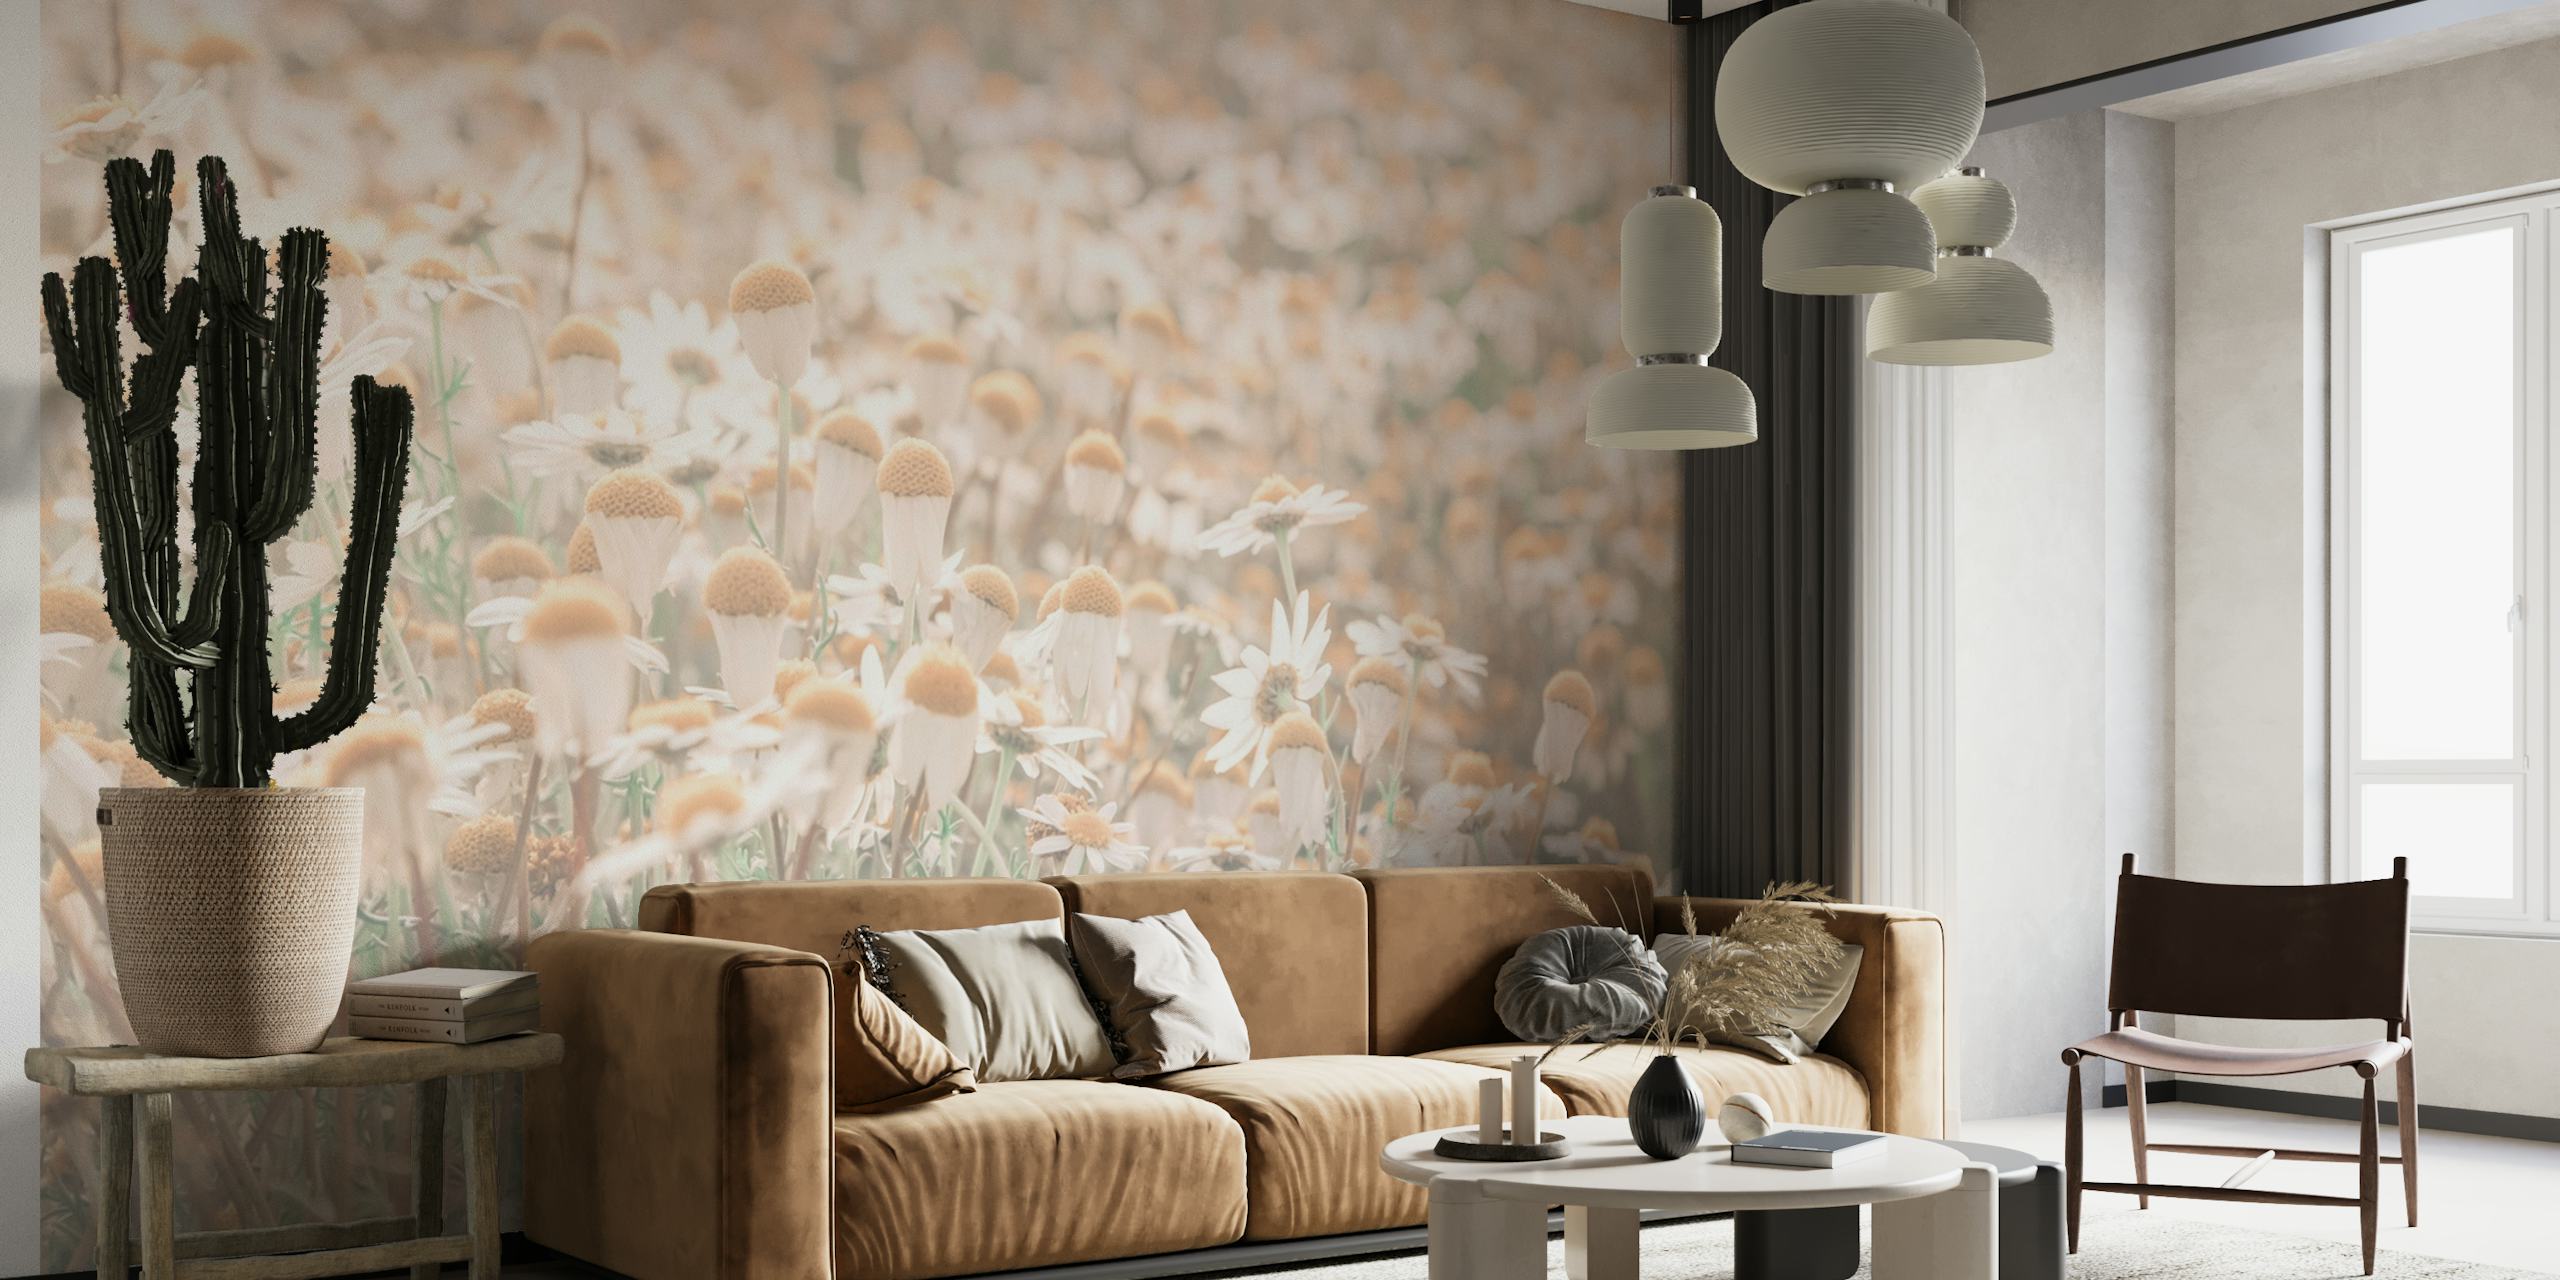 Soft-focused daisy field wall mural in muted summer tones